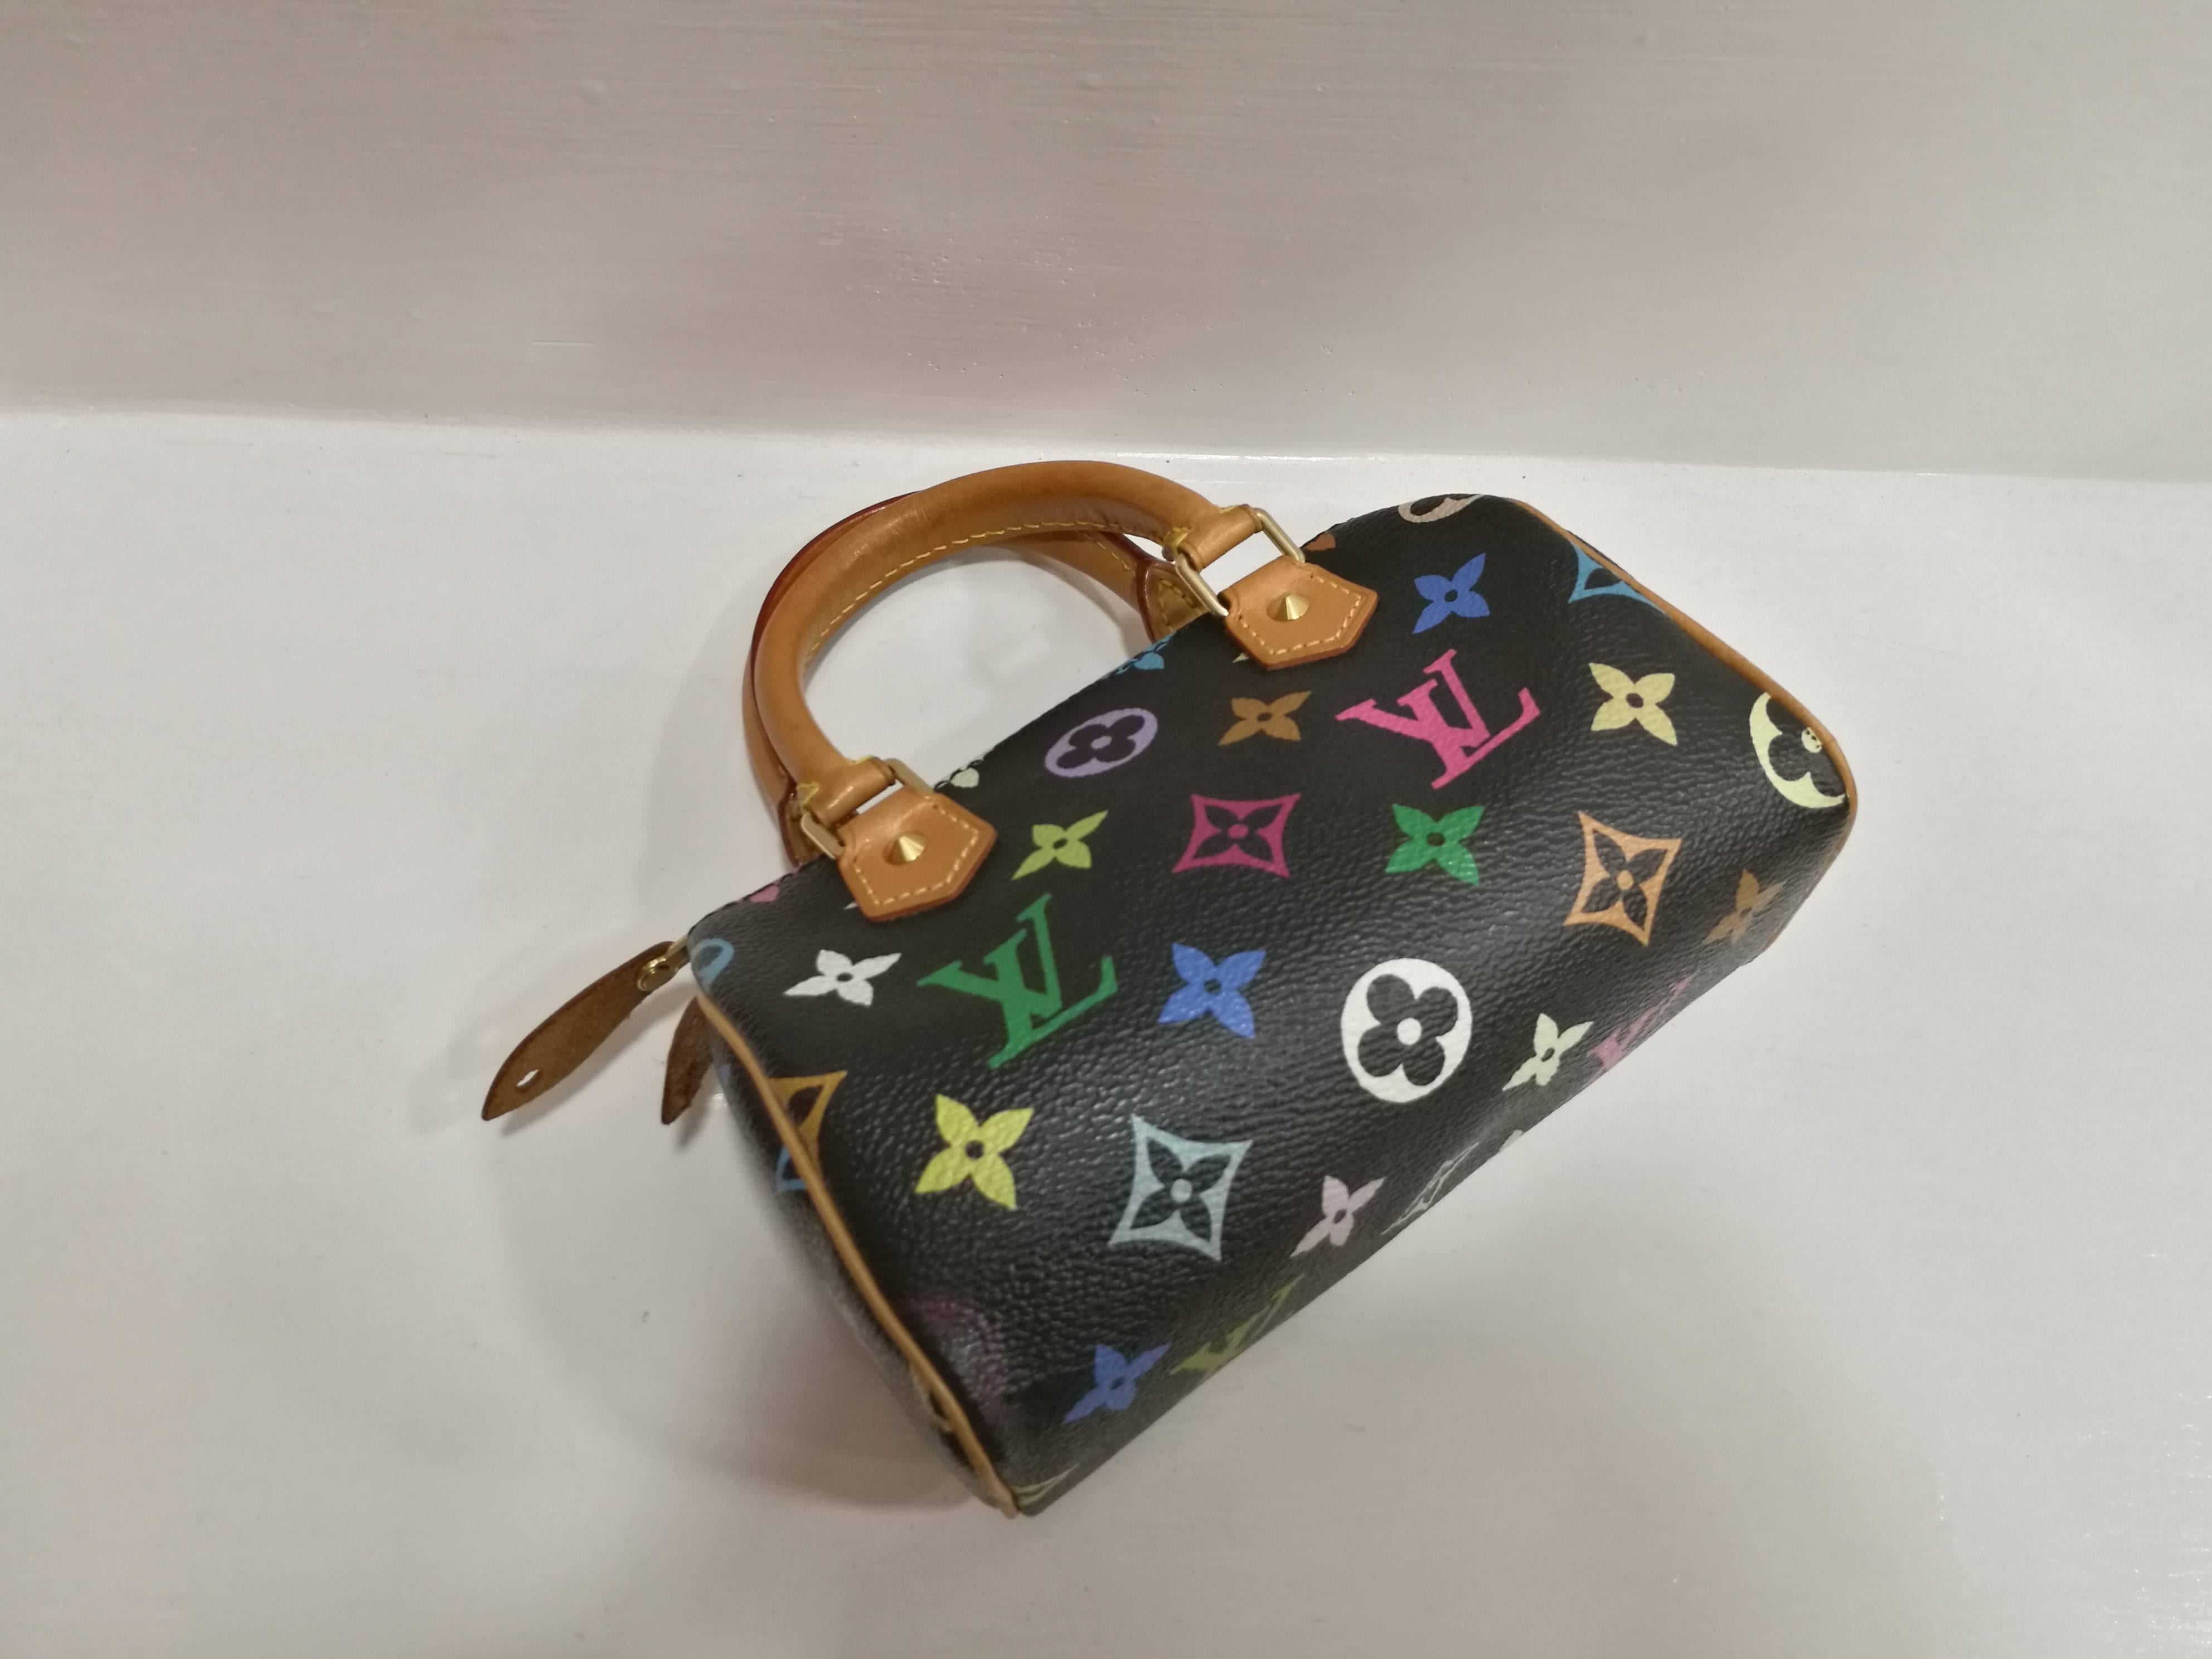 LOUIS VUITTON Multicolor Mini Sac HL Speedy Black
This chic small mini Speedy is crafted of multicolore Louis Vuitton monogram in 33 vibrant colors on black toile canvas. The bag features rolled leather top handles with polished brass hardware. The